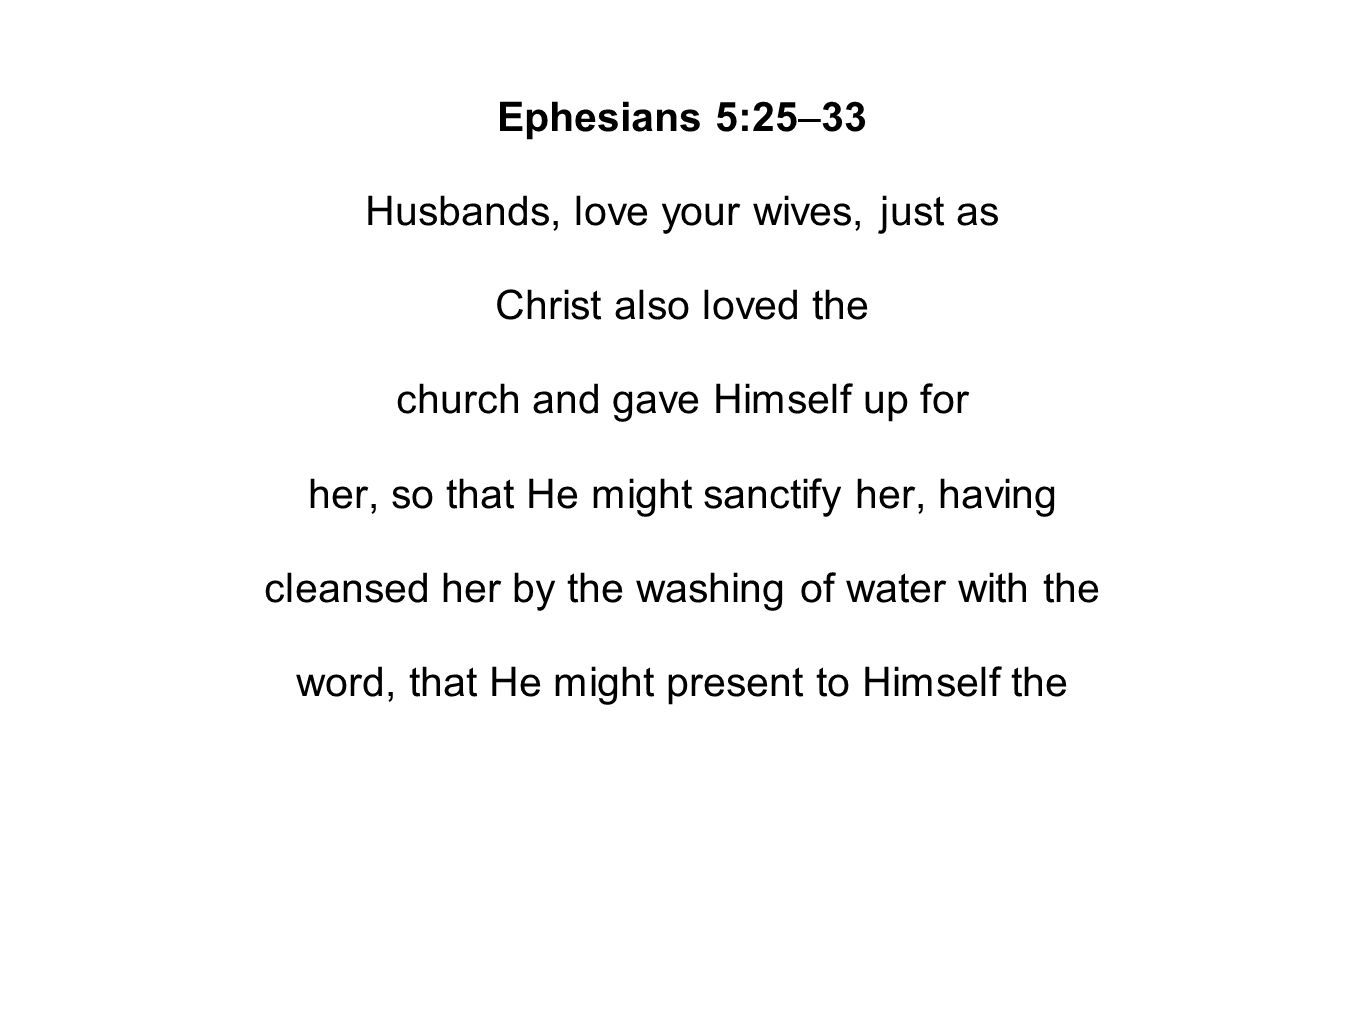 Ephesians 5:25–33 Husbands, love your wives, just as Christ also loved the church and gave Himself up for her, so that He might sanctify her, having cleansed her by the washing of water with the word, that He might present to Himself the